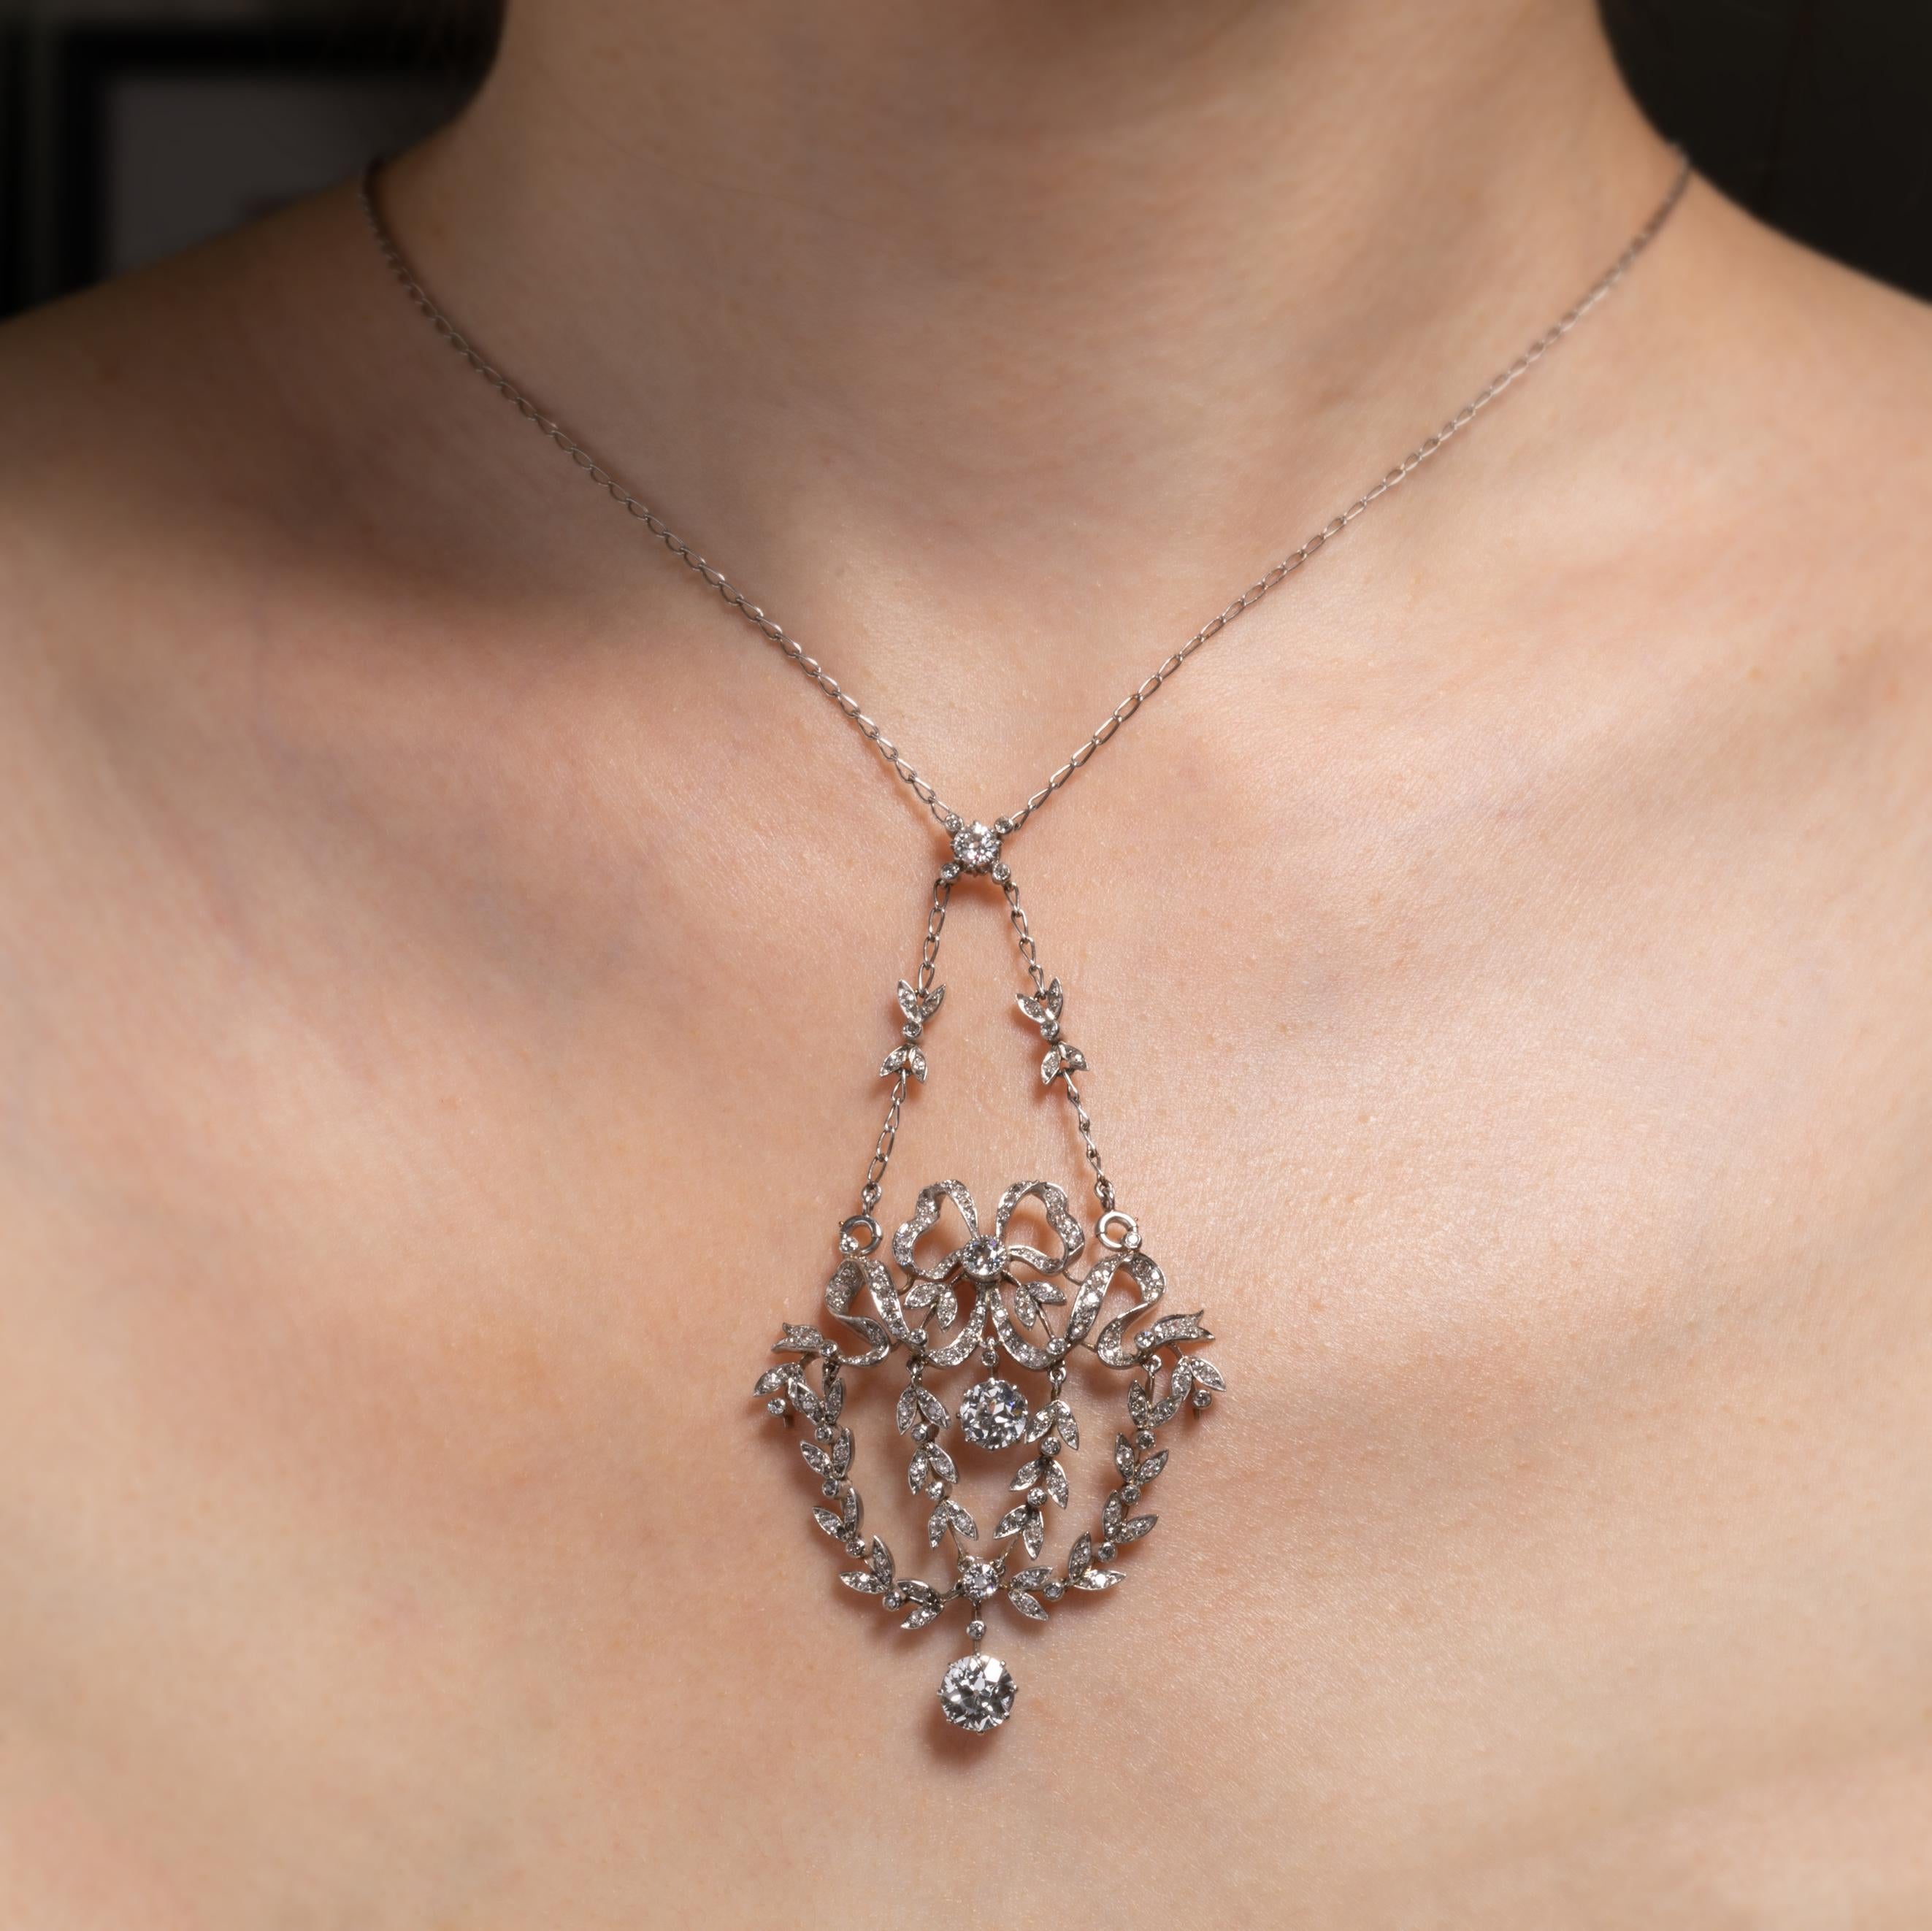 Very beautiful antique necklace, made in France circa 1910.

Made in Platinum and diamonds.

The two principal diamonds are good quality, round old European cut. They are very white in colour (F/G) and clear. They weight 1 carat for one and 0.75 for